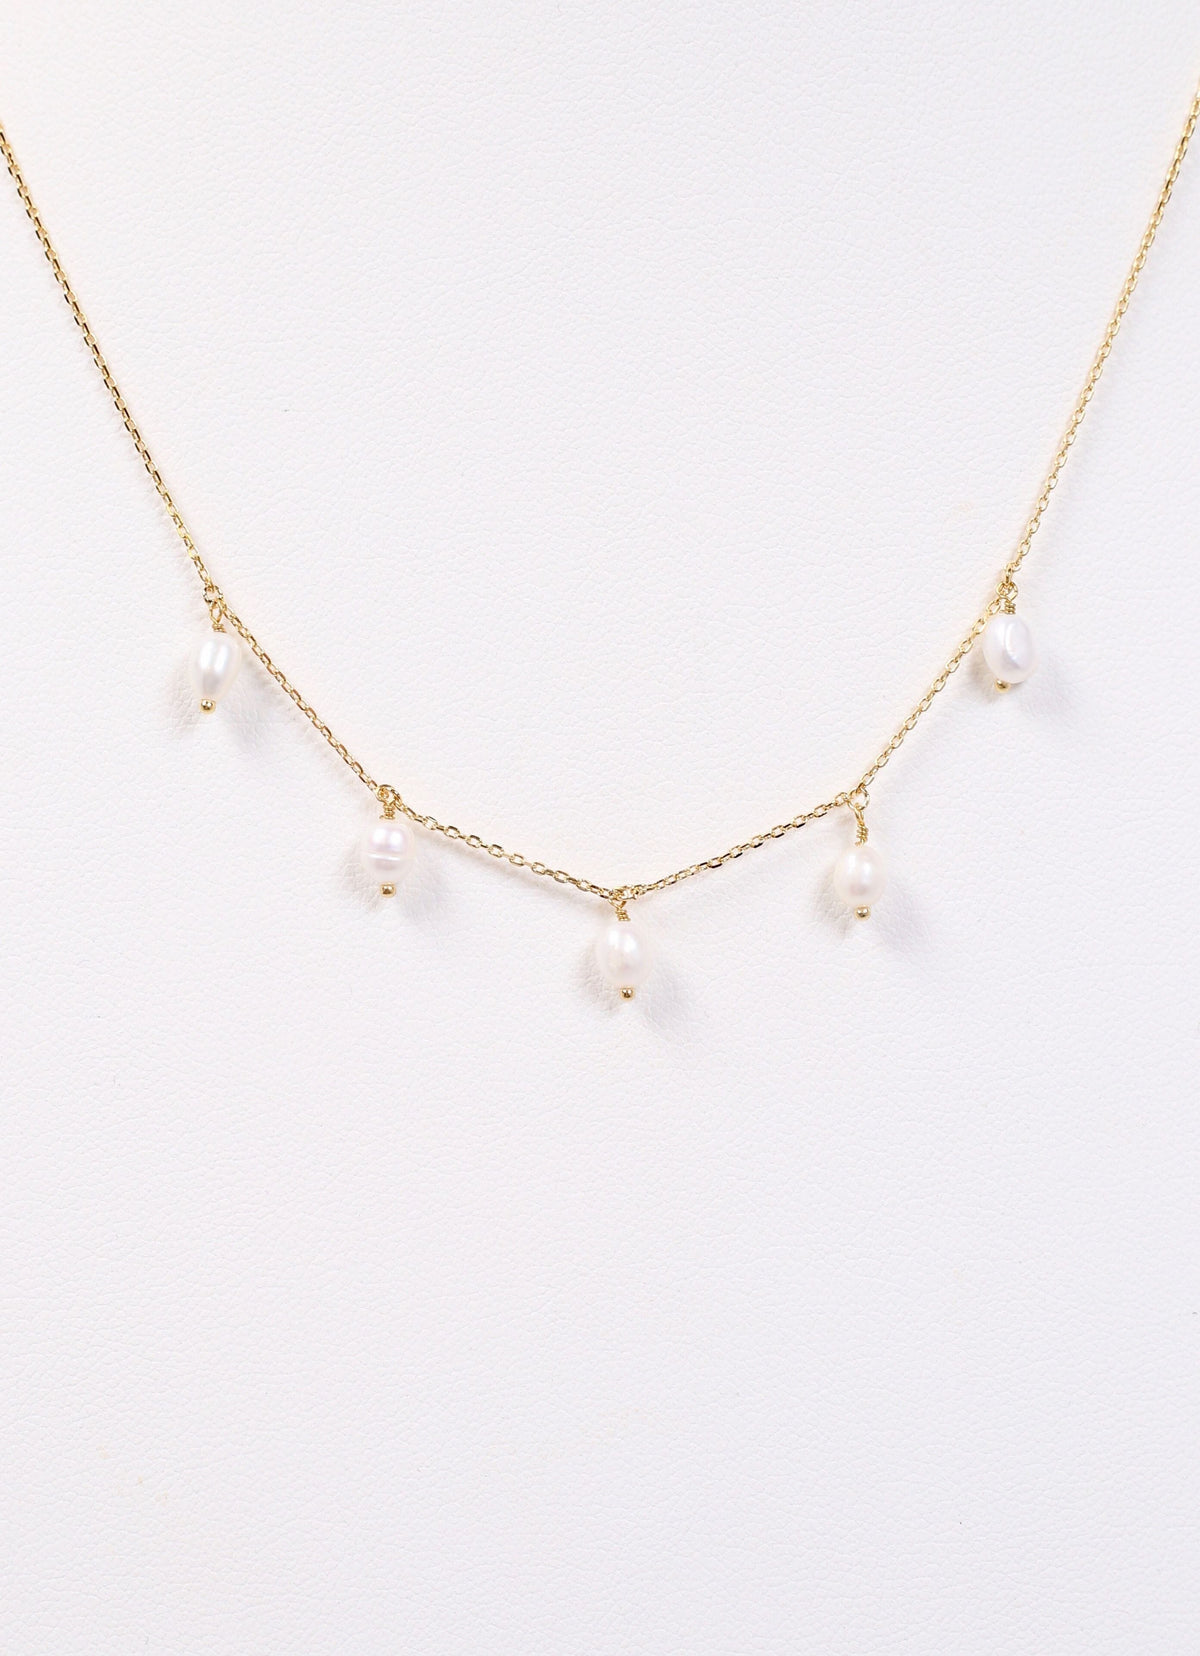 Laurier Pearl Necklace GOLD - Caroline Hill